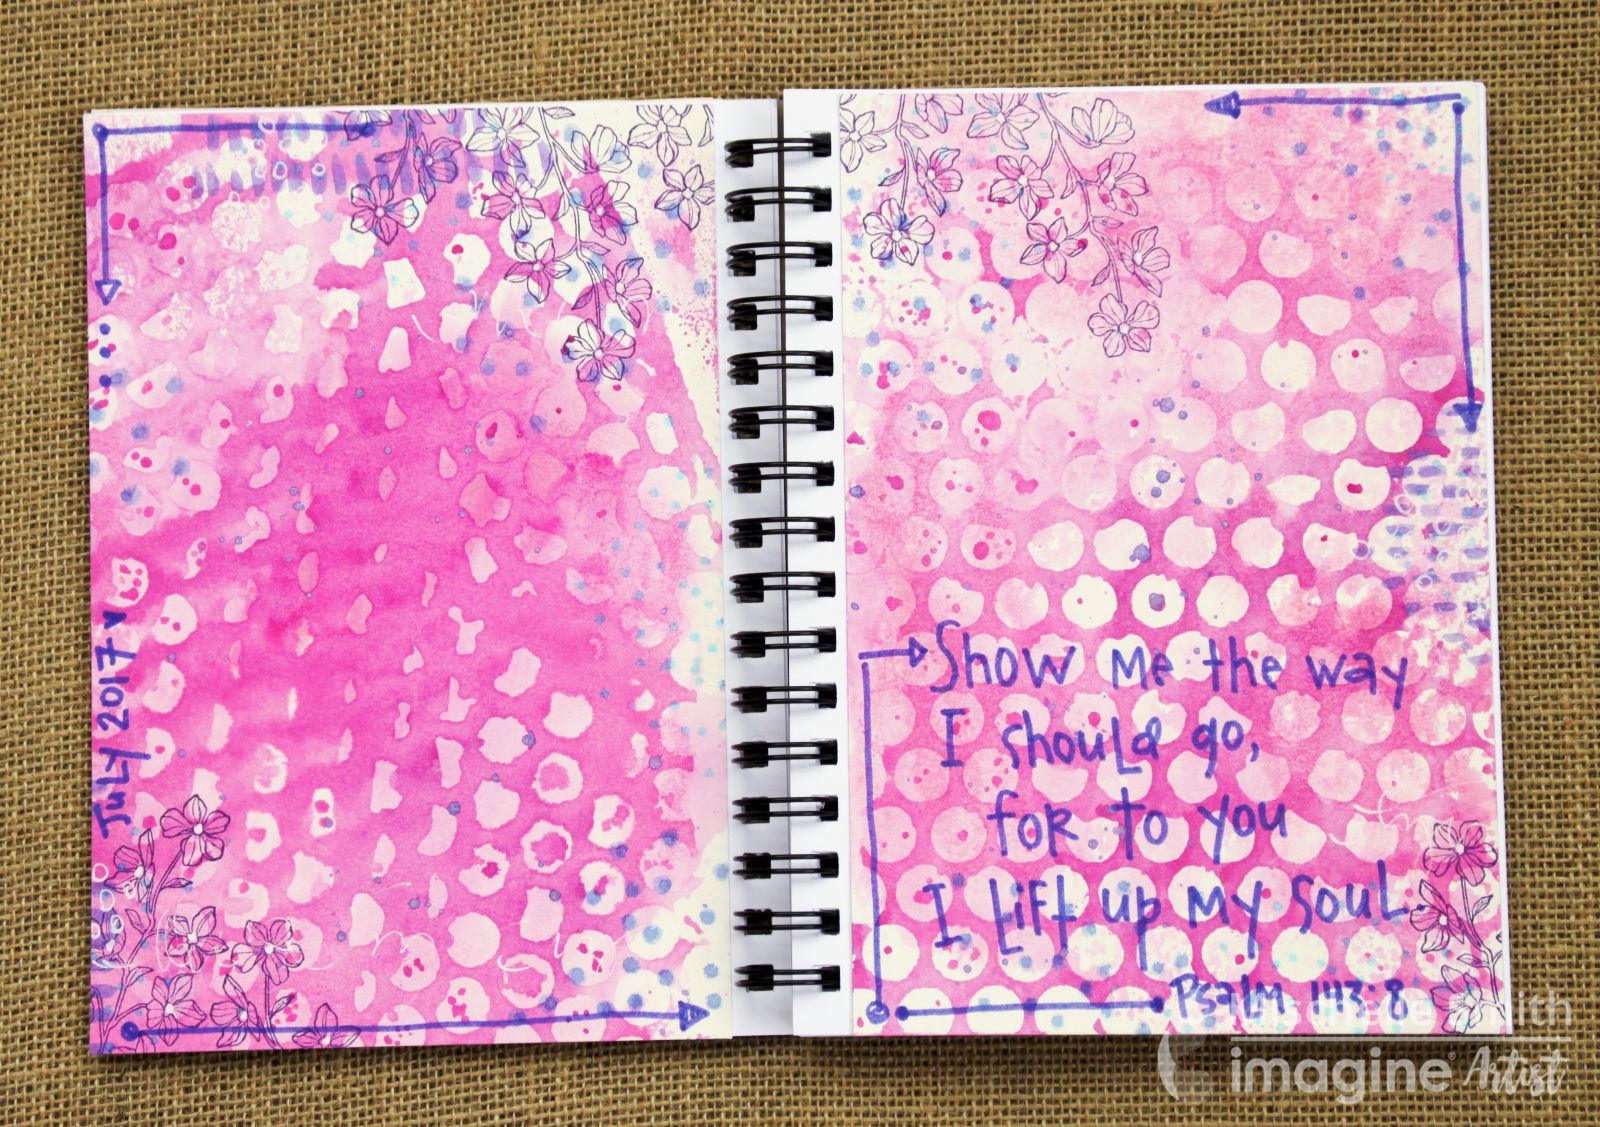 Bible Journal Layout featuring several ink layers created using Fireworks Shimmery Craft Spray and Ink Potion No. 9 by Mischelle Smith.